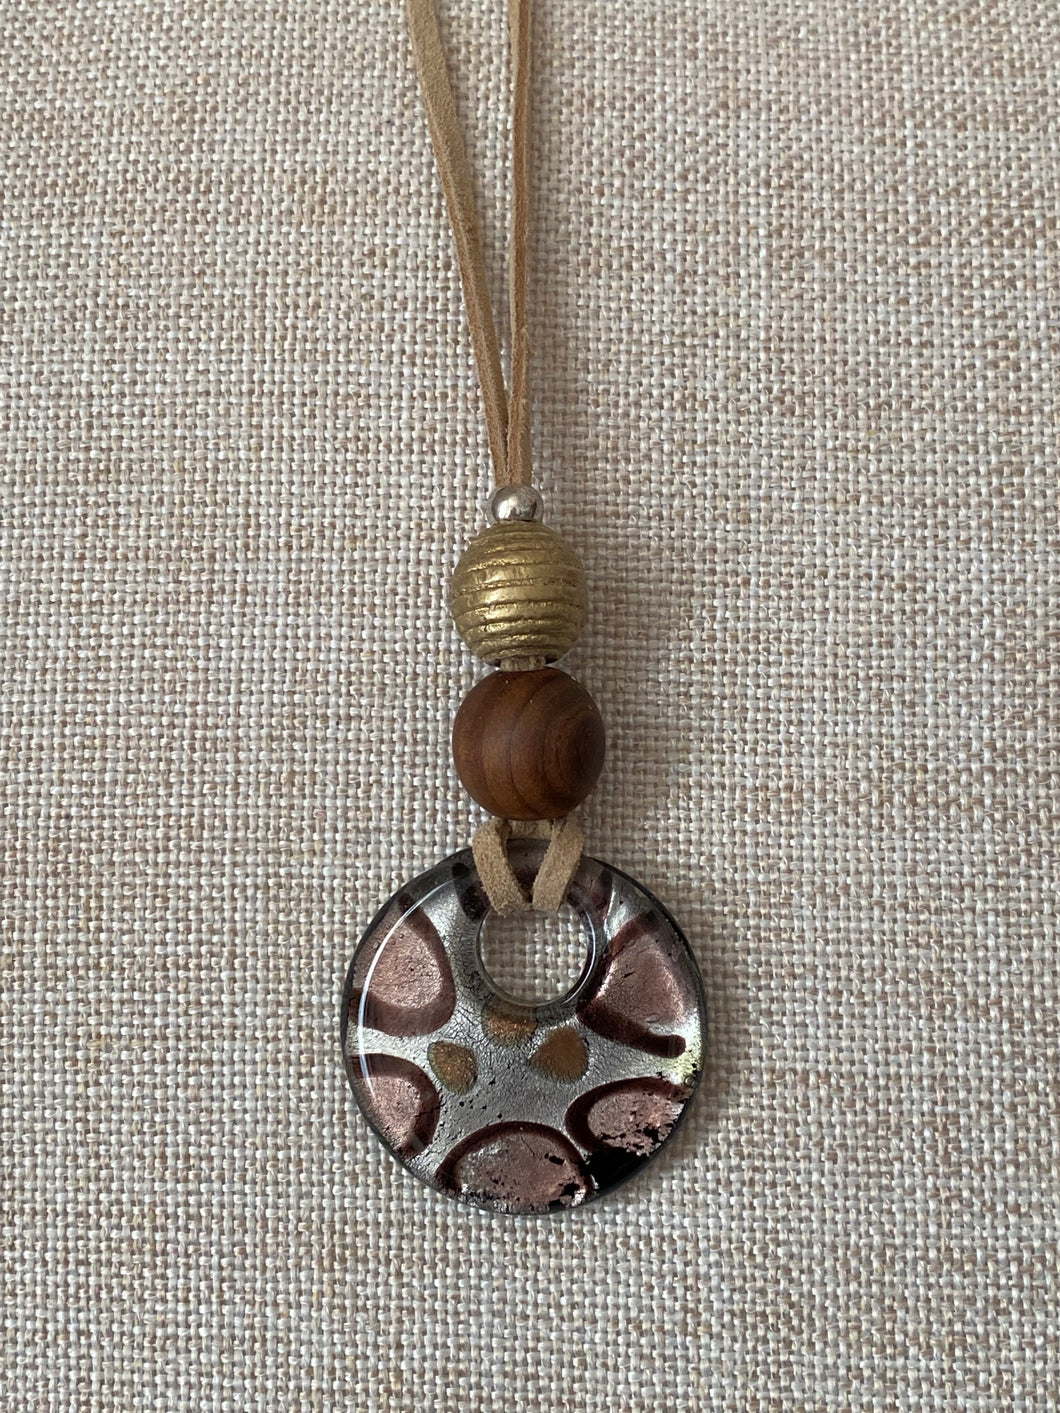 Spot Glass Pendant and Suede String Necklace